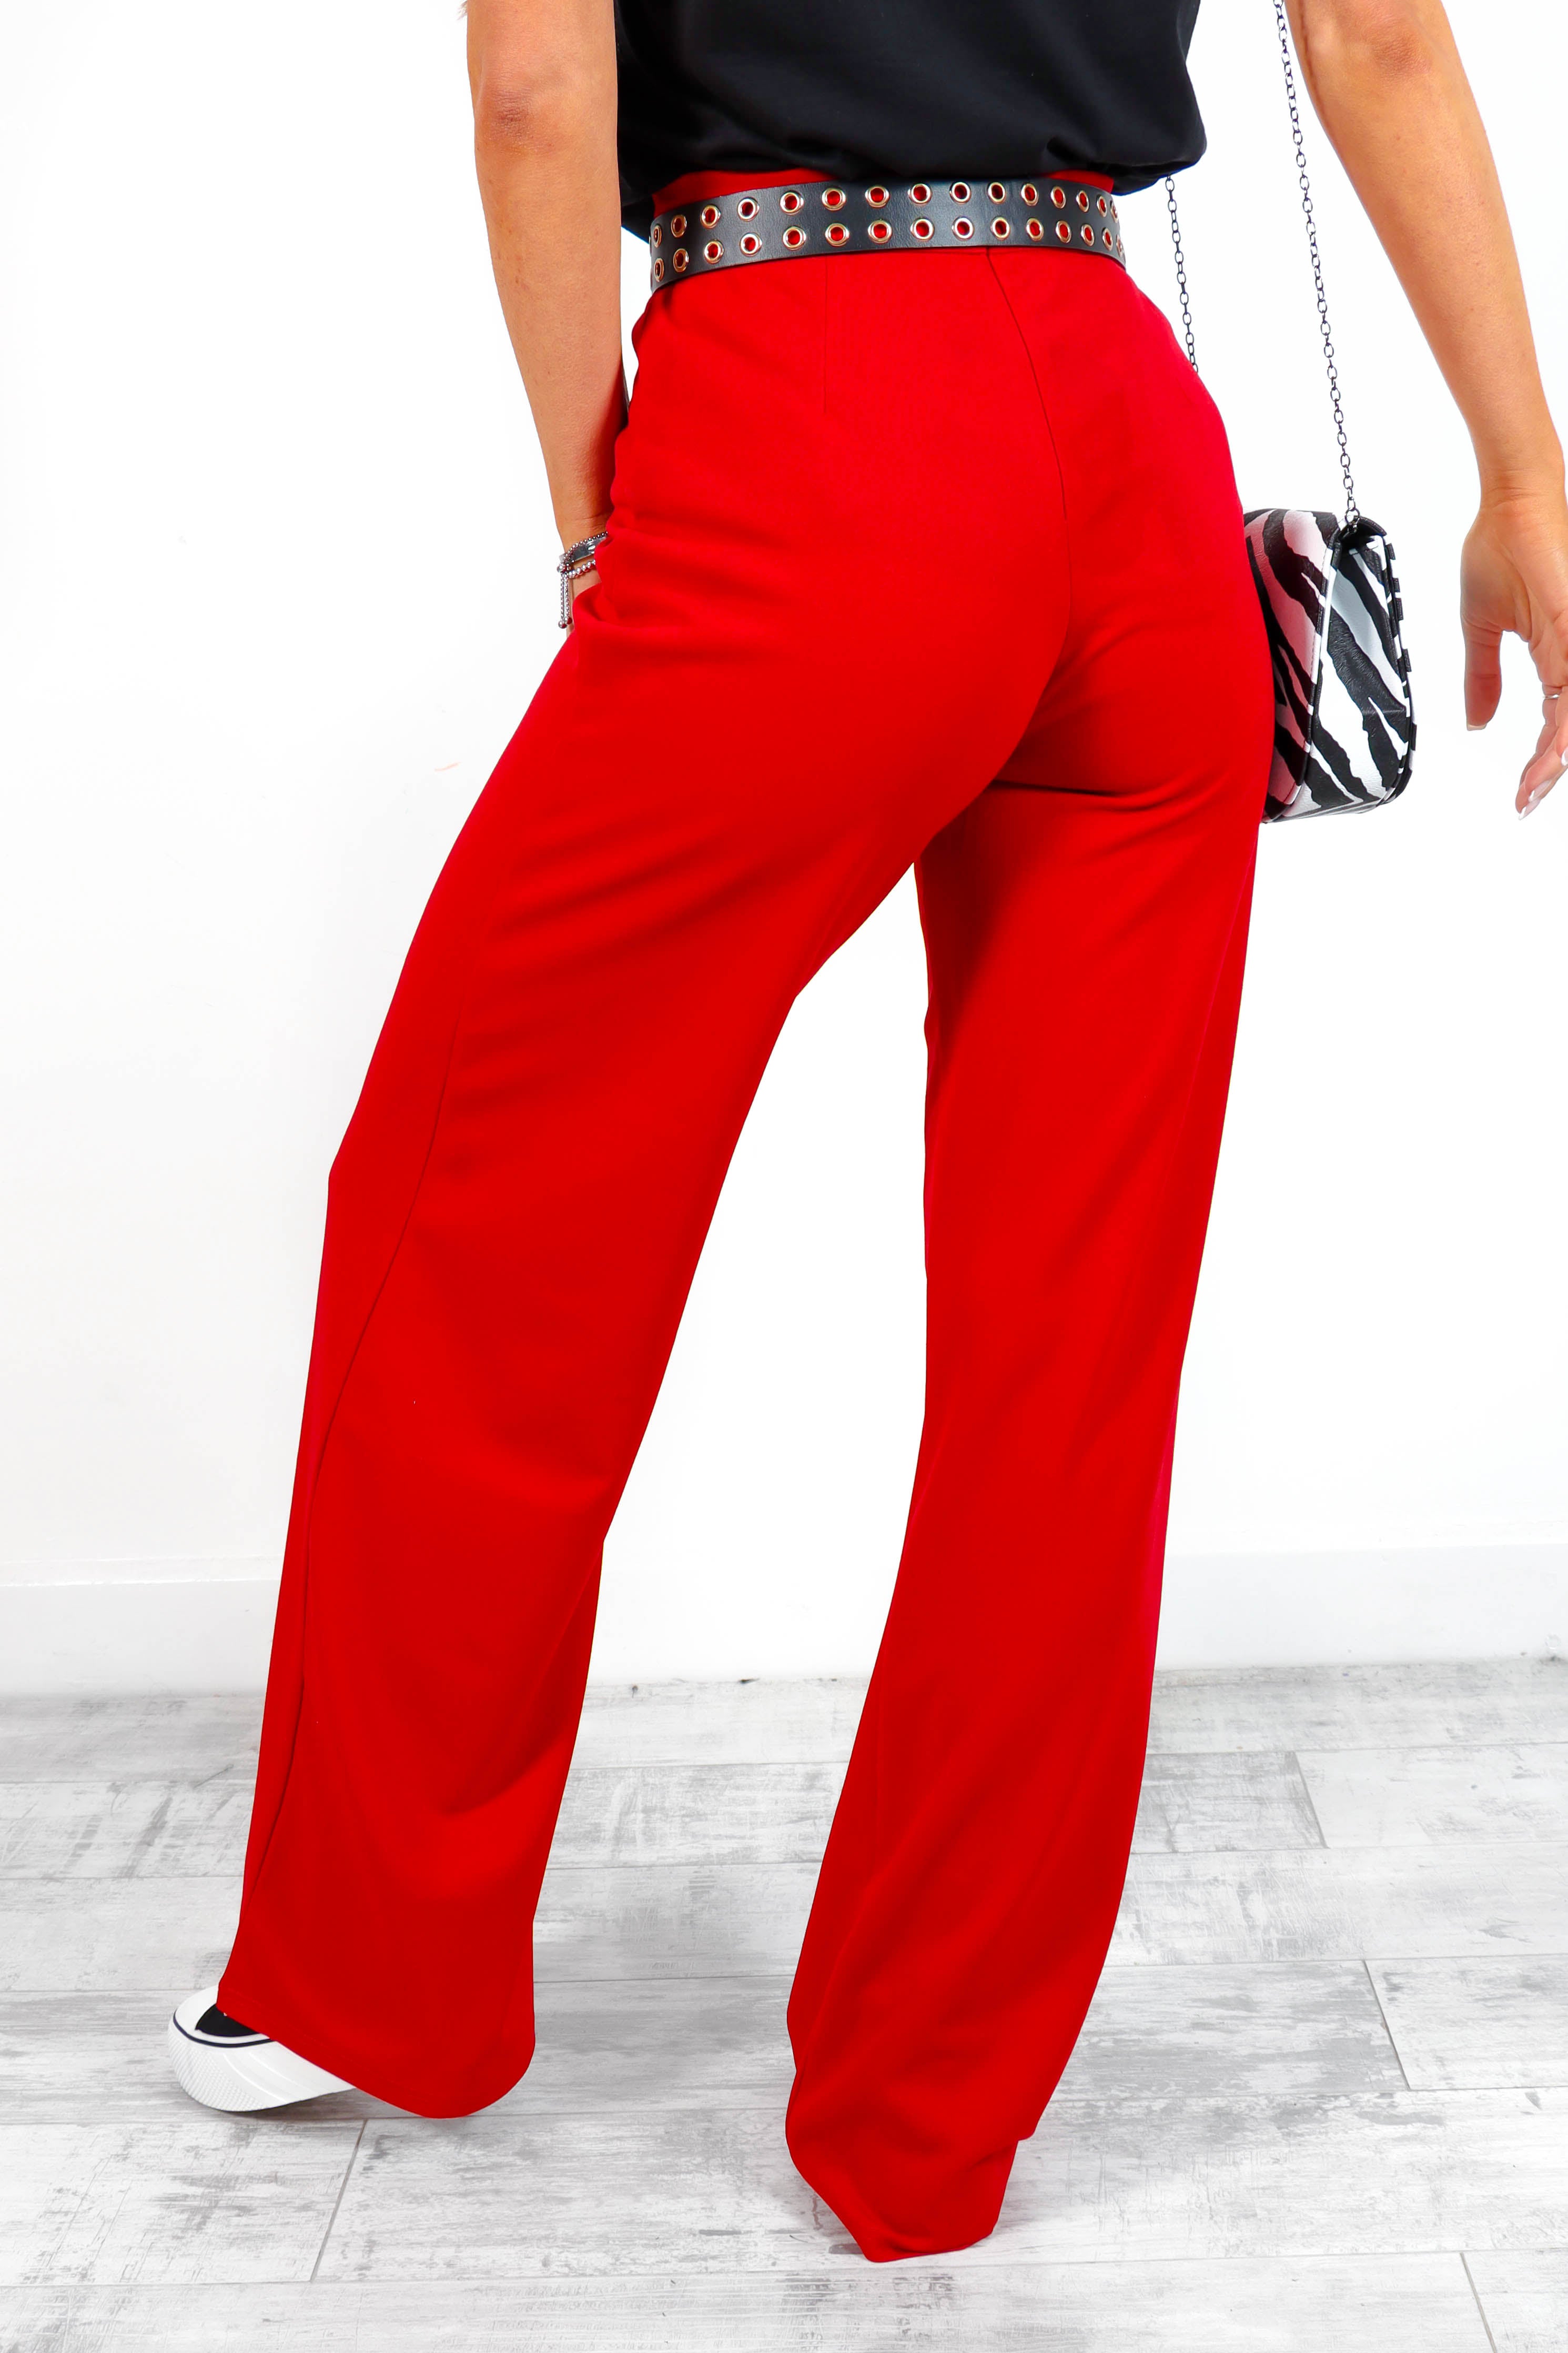 Opportune Moment Red Wide Leg Trouser Pants  Red wide leg trousers, Career  outfits, Wide leg trouser